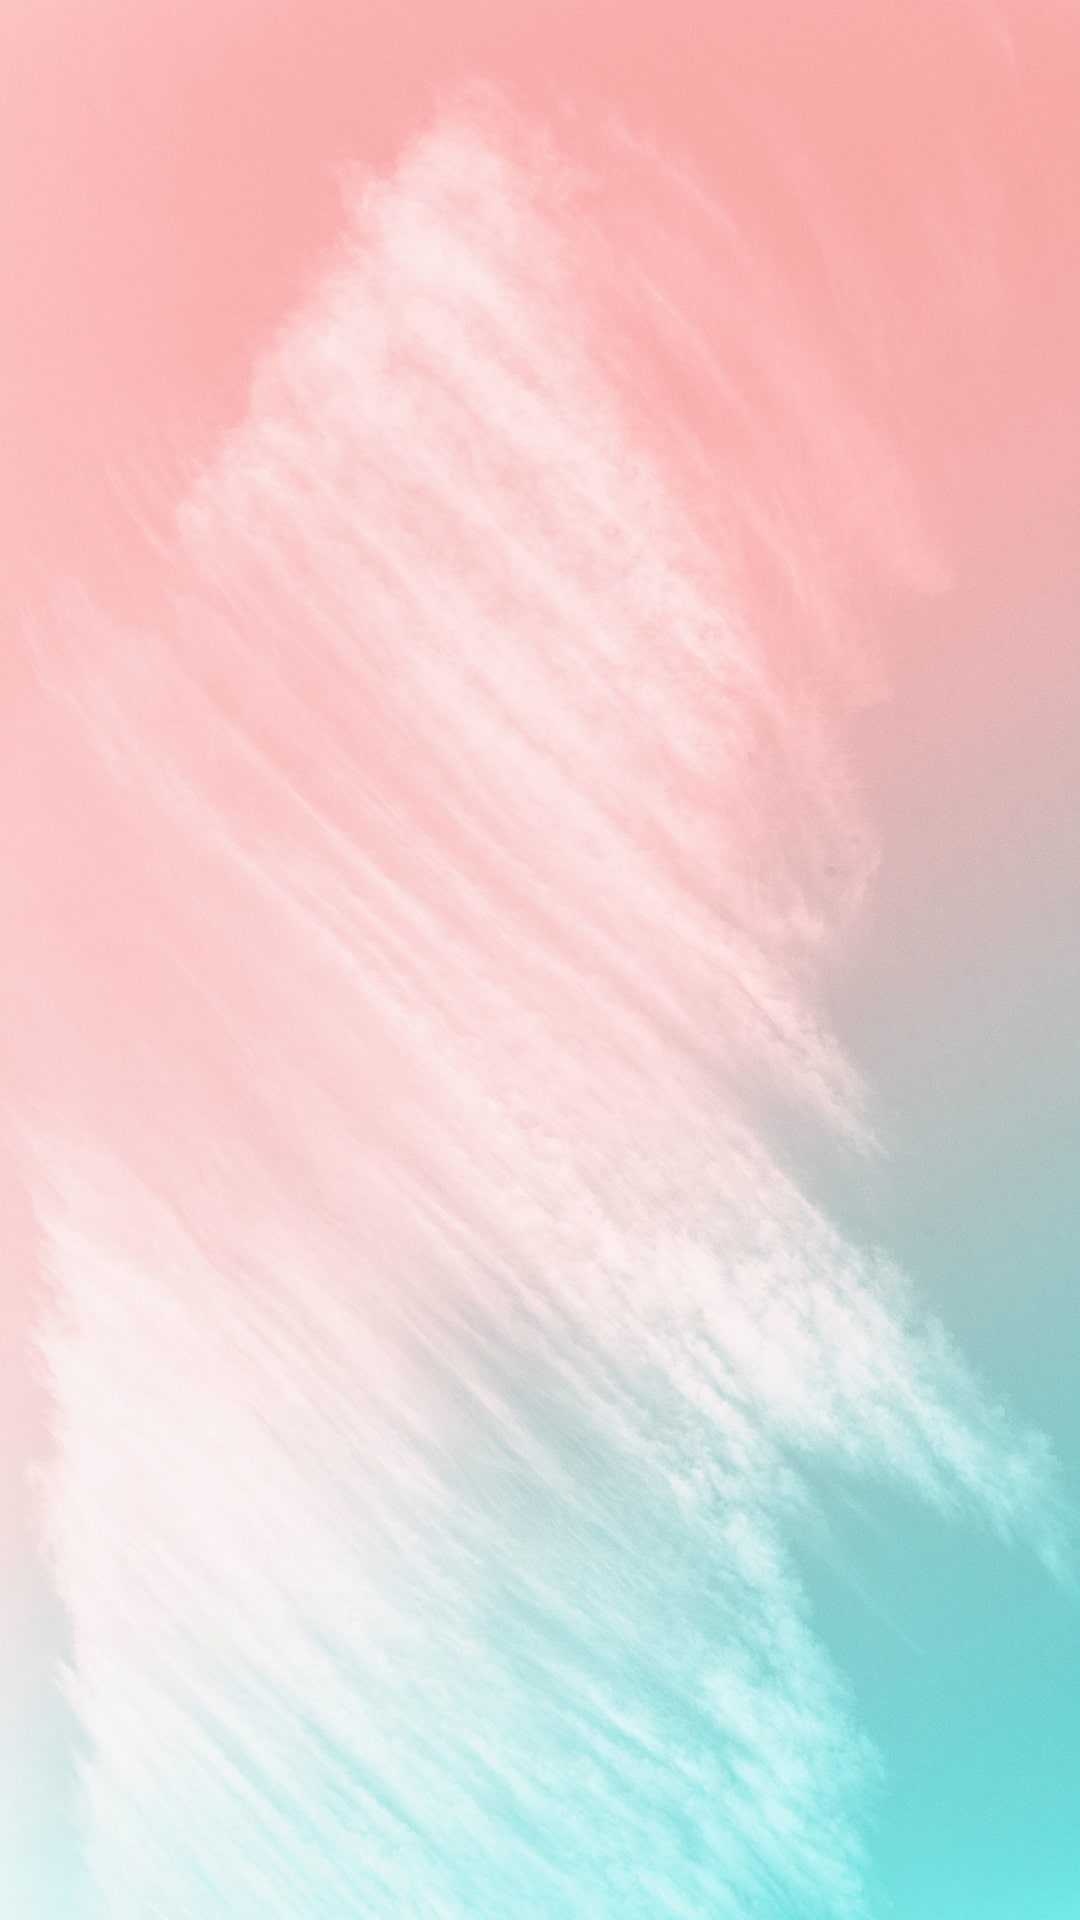 Pastel colors wallpapers, Soft and dreamy, Serene and soothing, Tranquil and relaxing, 1080x1920 Full HD Phone